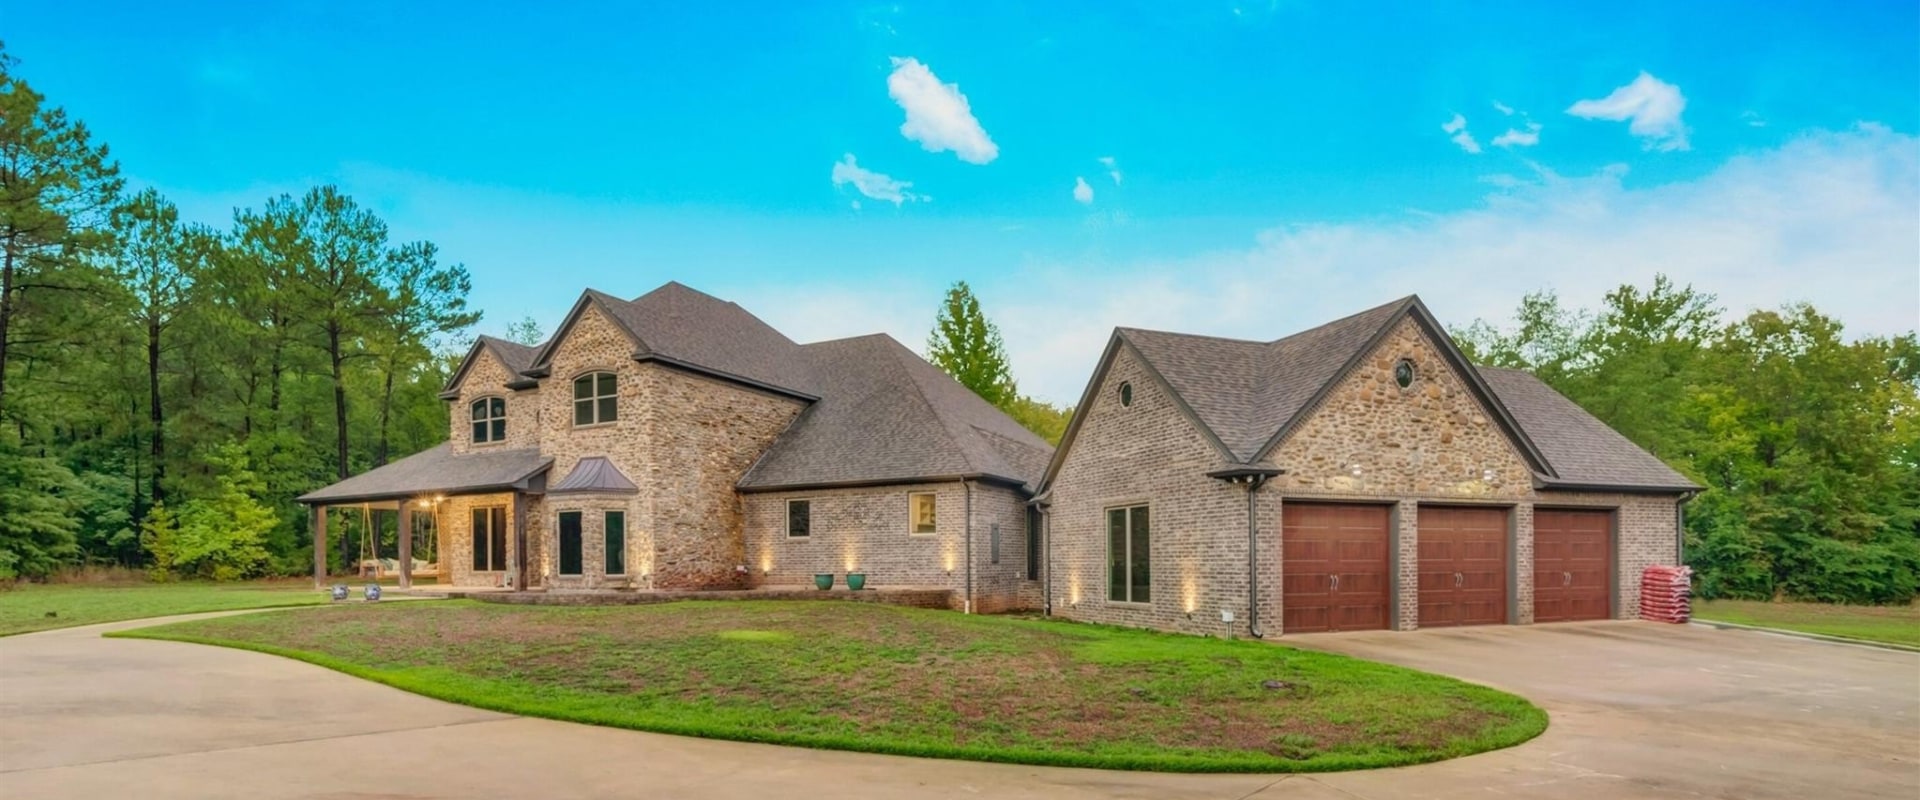 Buying A Lindale Texas Luxury Home As Investment Property: How A Realtor Can Help